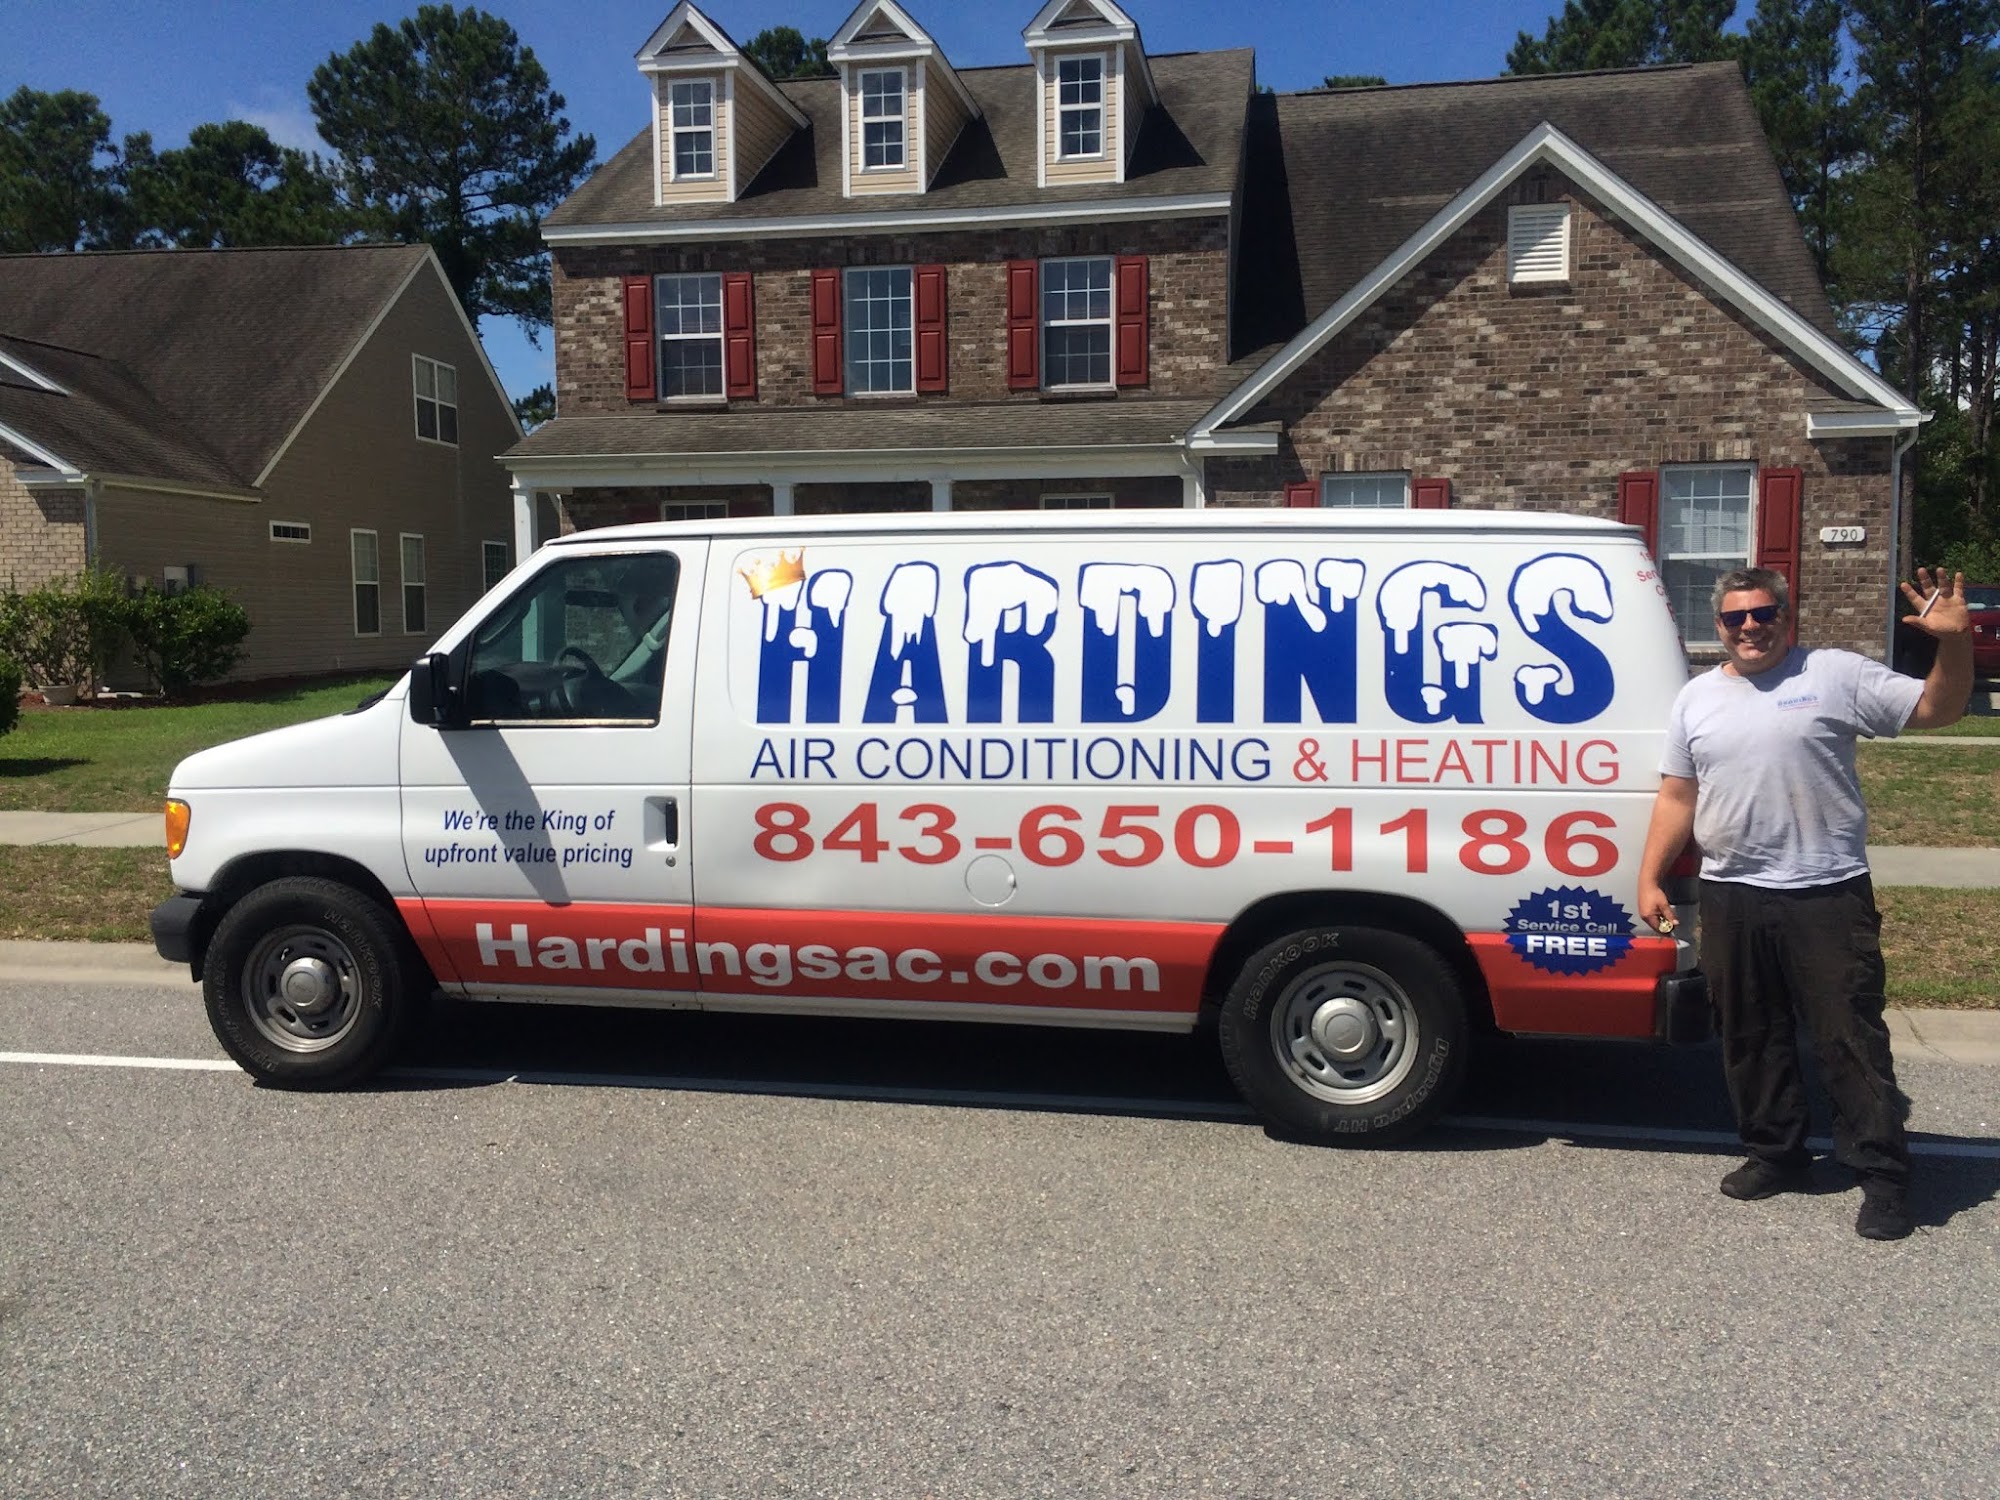 HARDING'S AIR CONDITIONING AND HEATING Llc